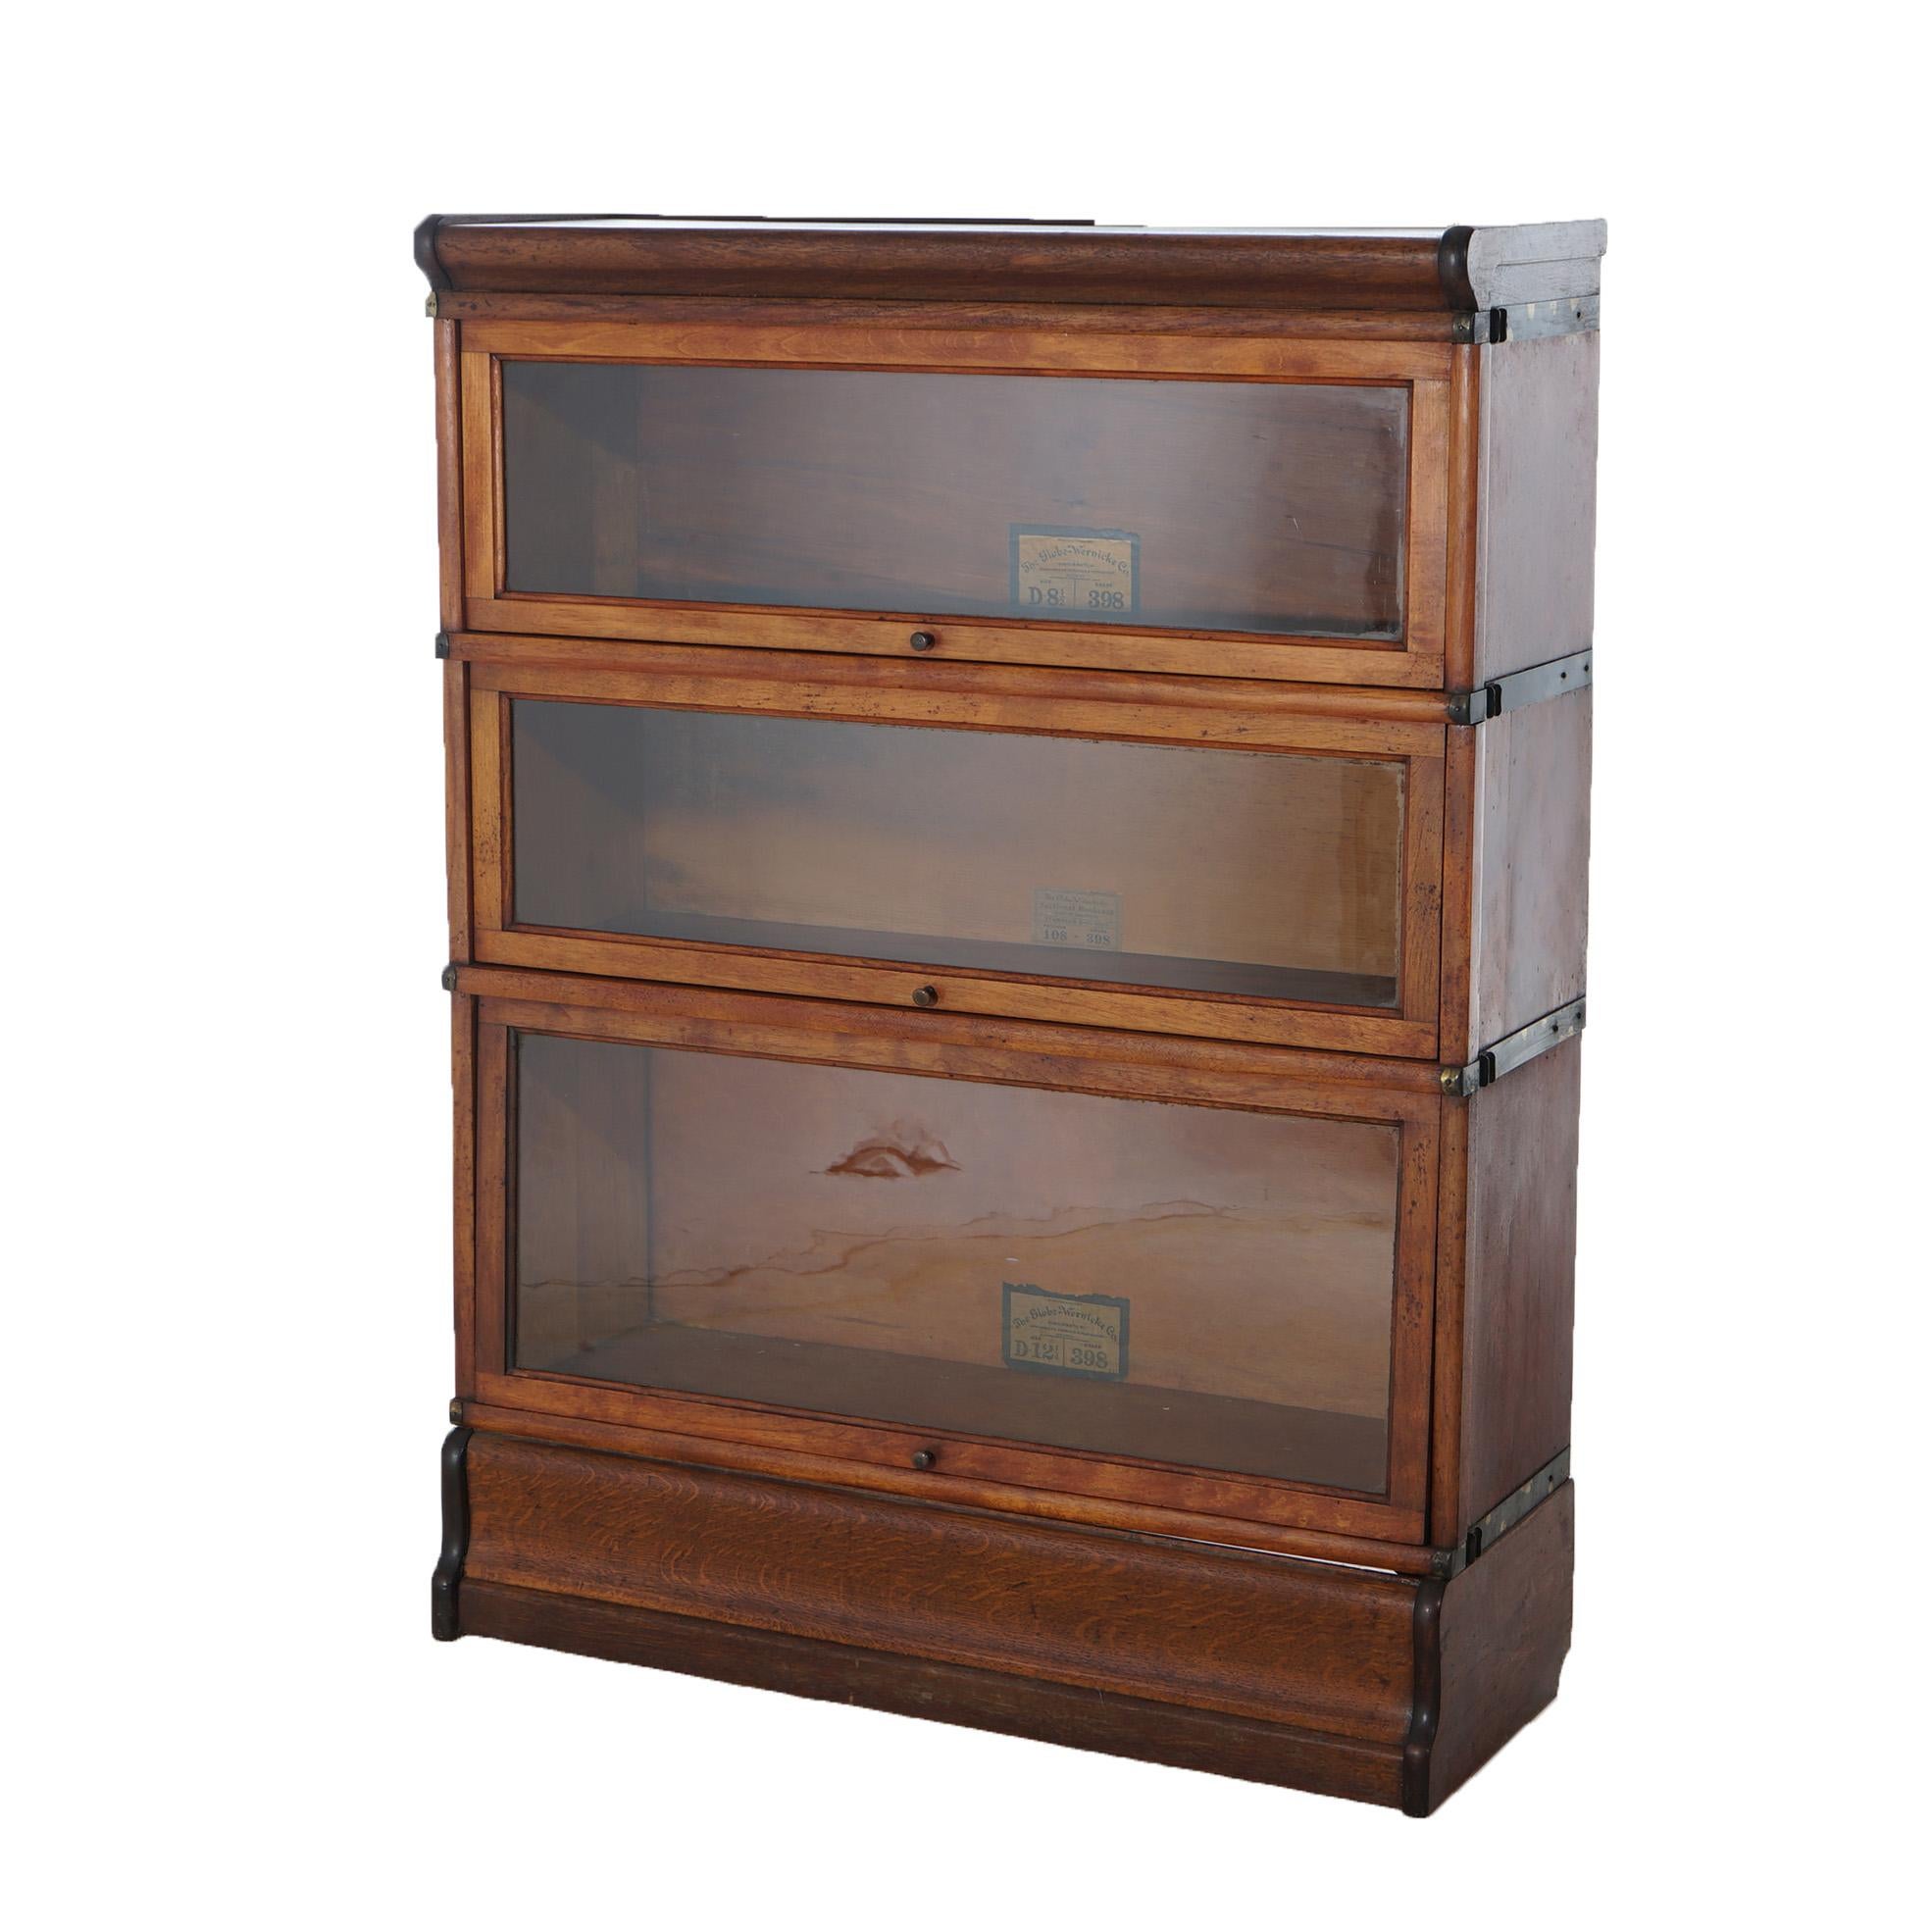 ***Ask About Discounted In-House Shipping***
An antique Arts and Crafts barrister bookcase by Globe Wernicke offers mahogany construction with three stacks, each having pullout glass doors and raised on an ogee base, maker label as photographed,